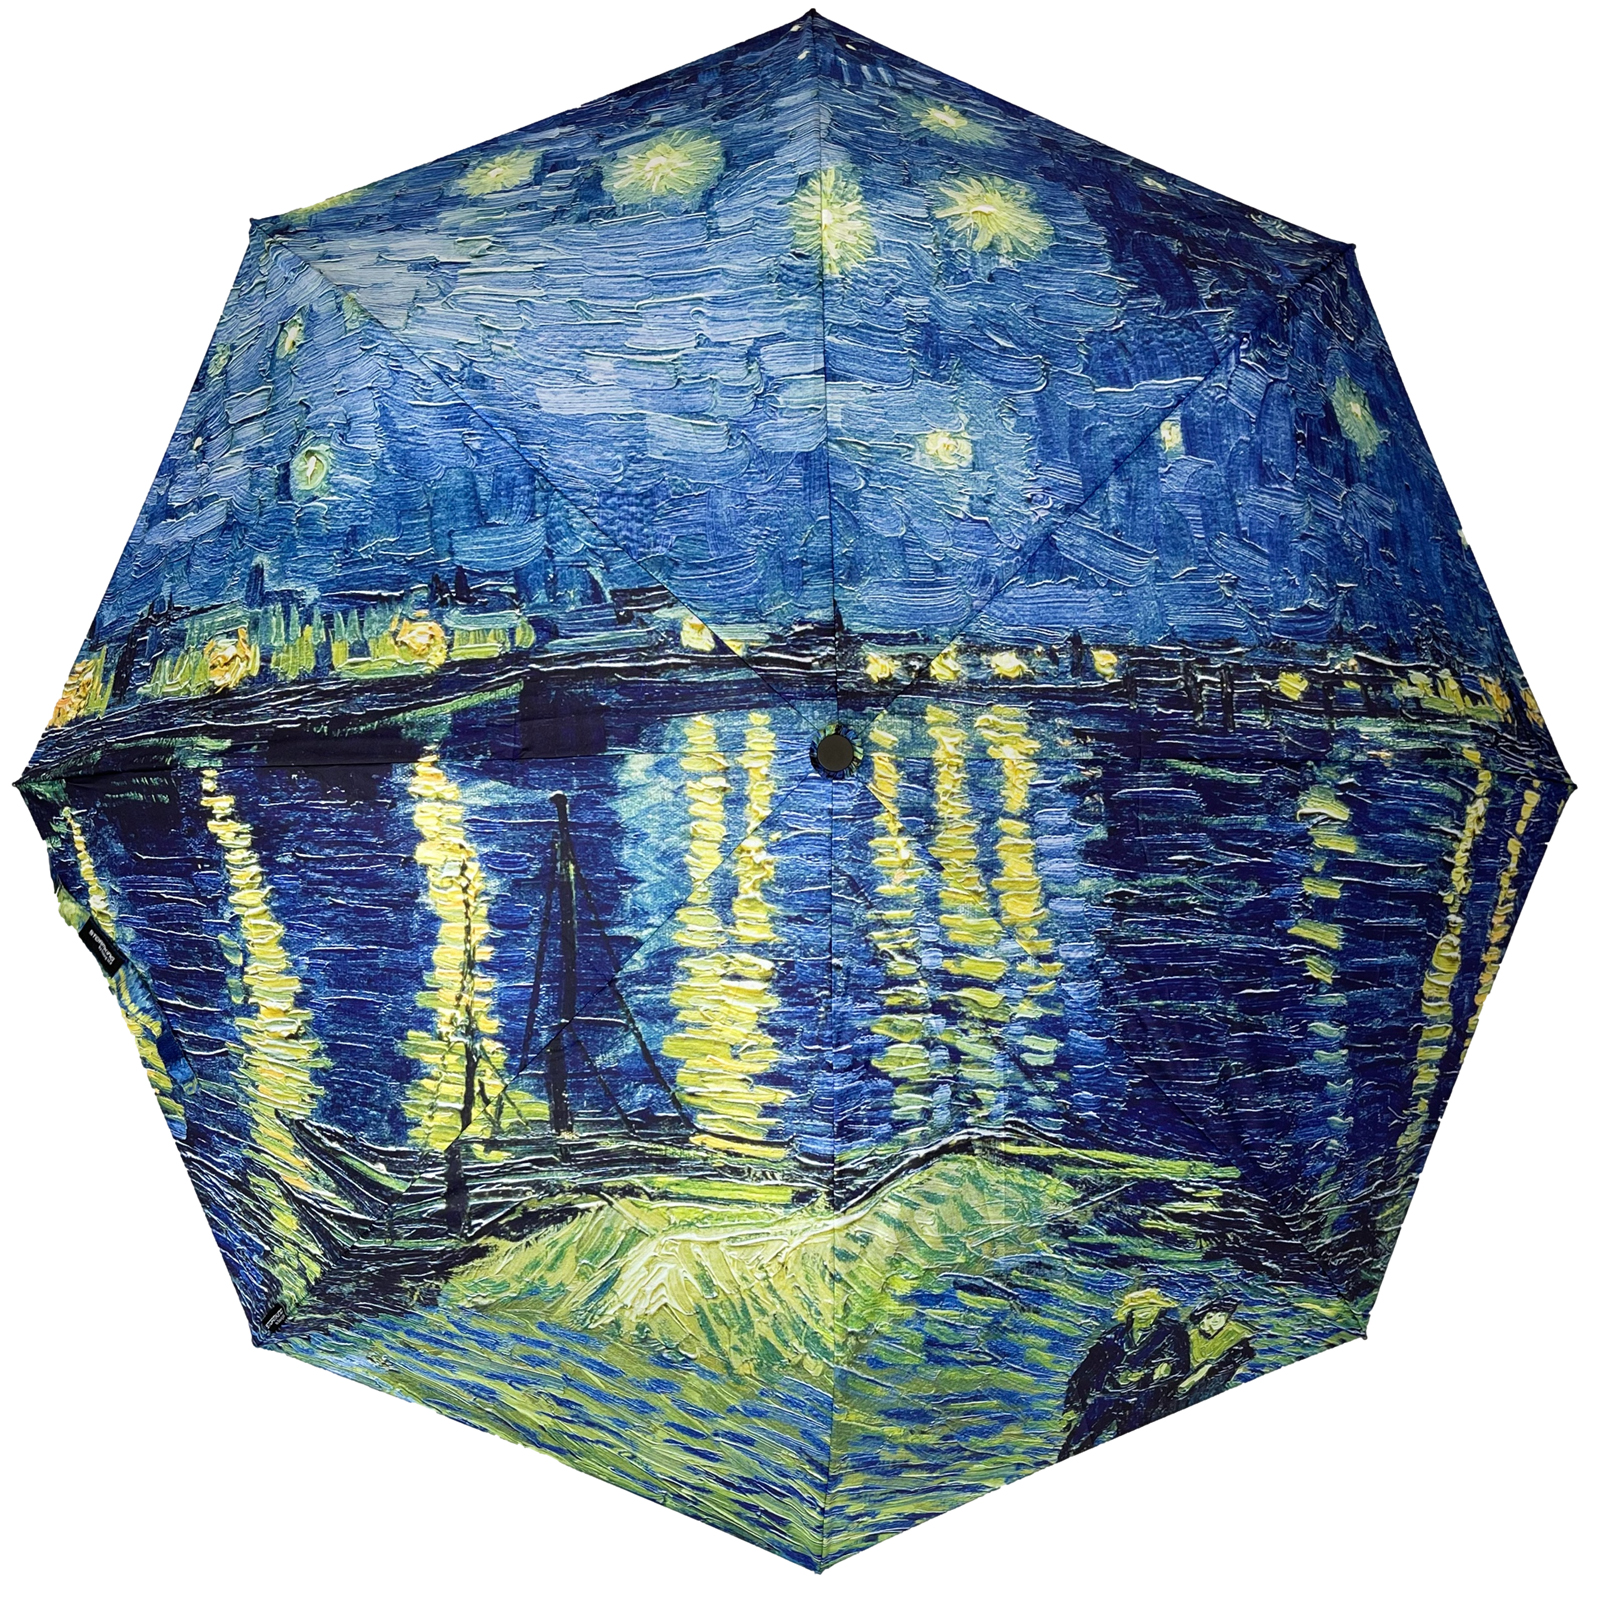 Stormking Auto Open & Close Folding Umbrella - Art Collection - Over the Rhone by Van Gogh